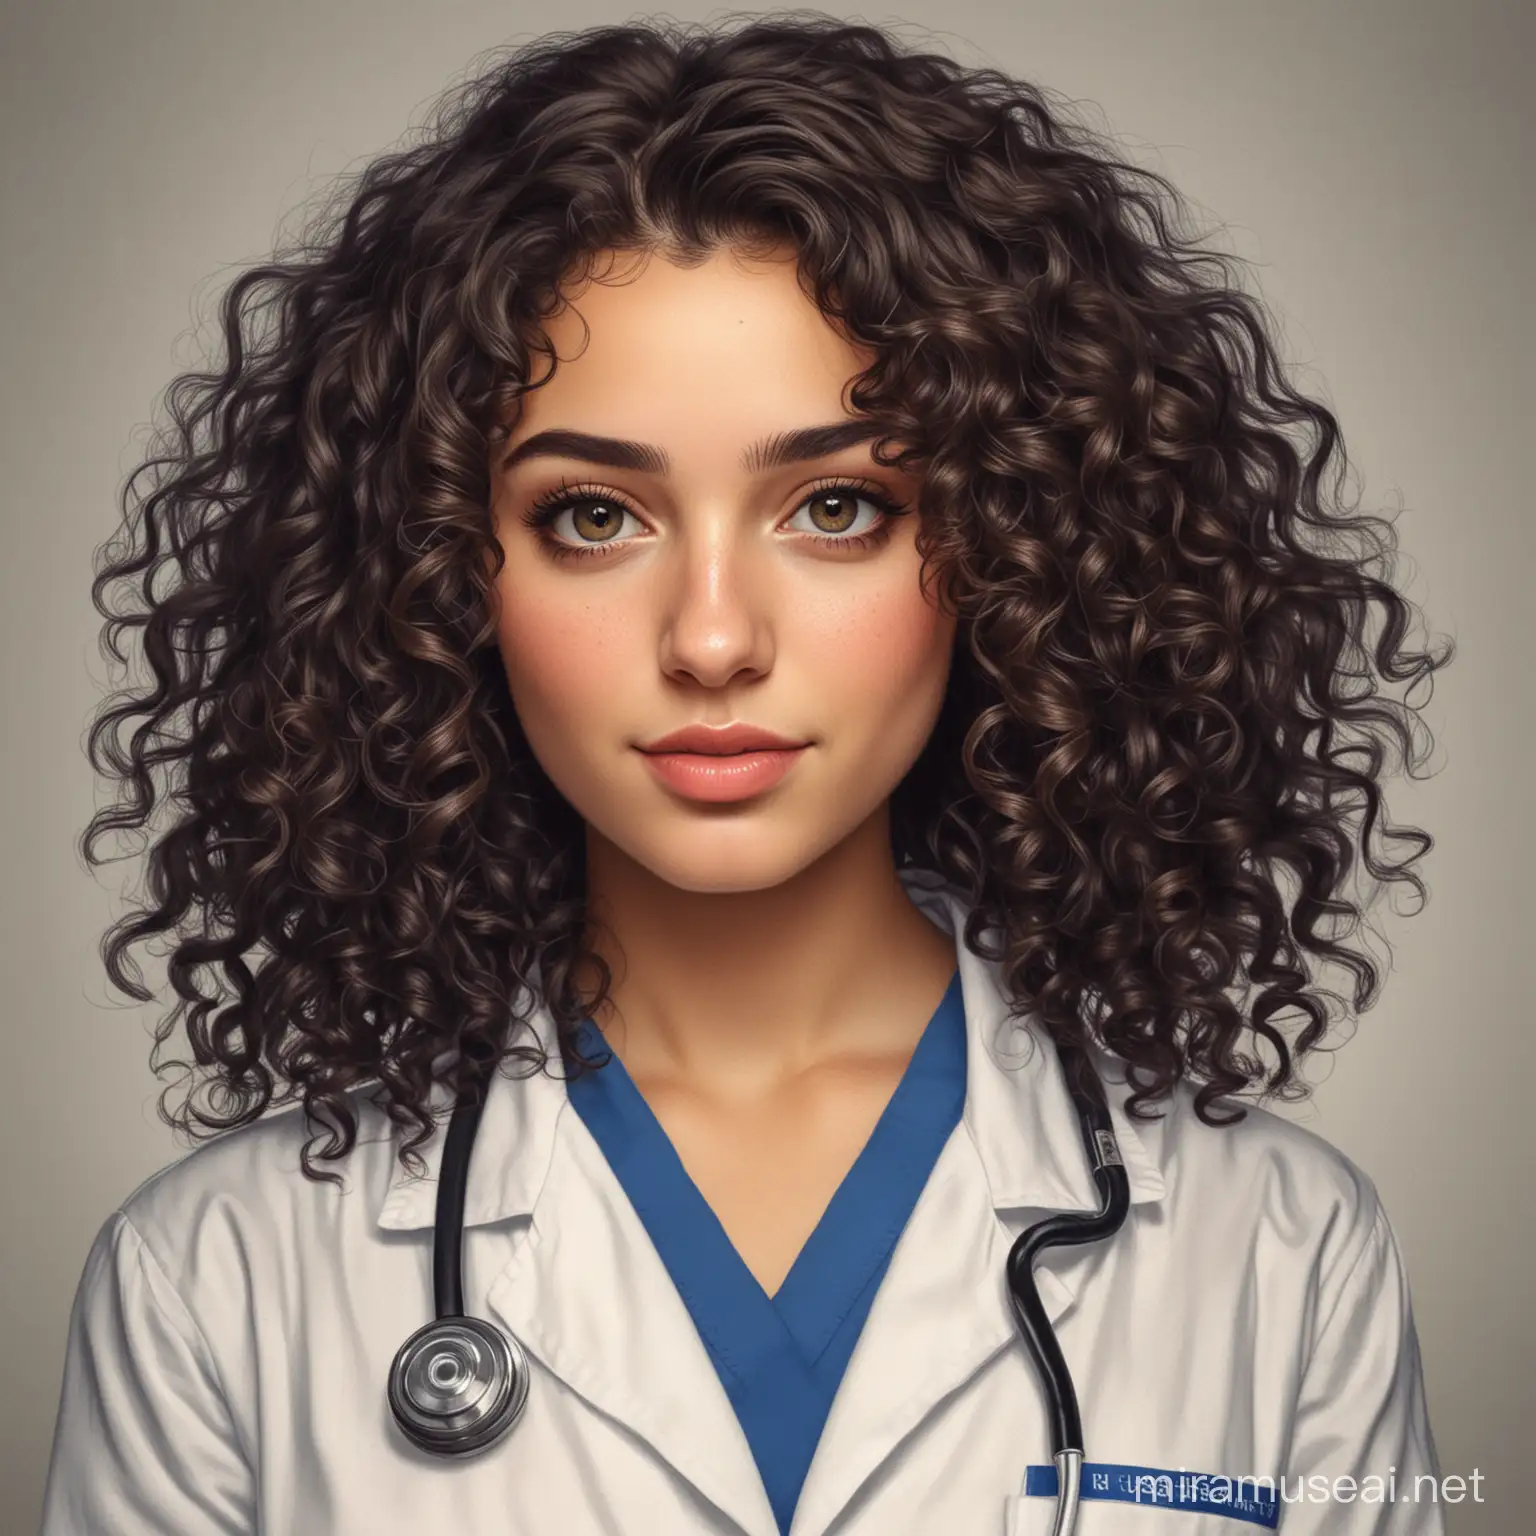 Israeli Girl with Curly Hair Working as a Doctor